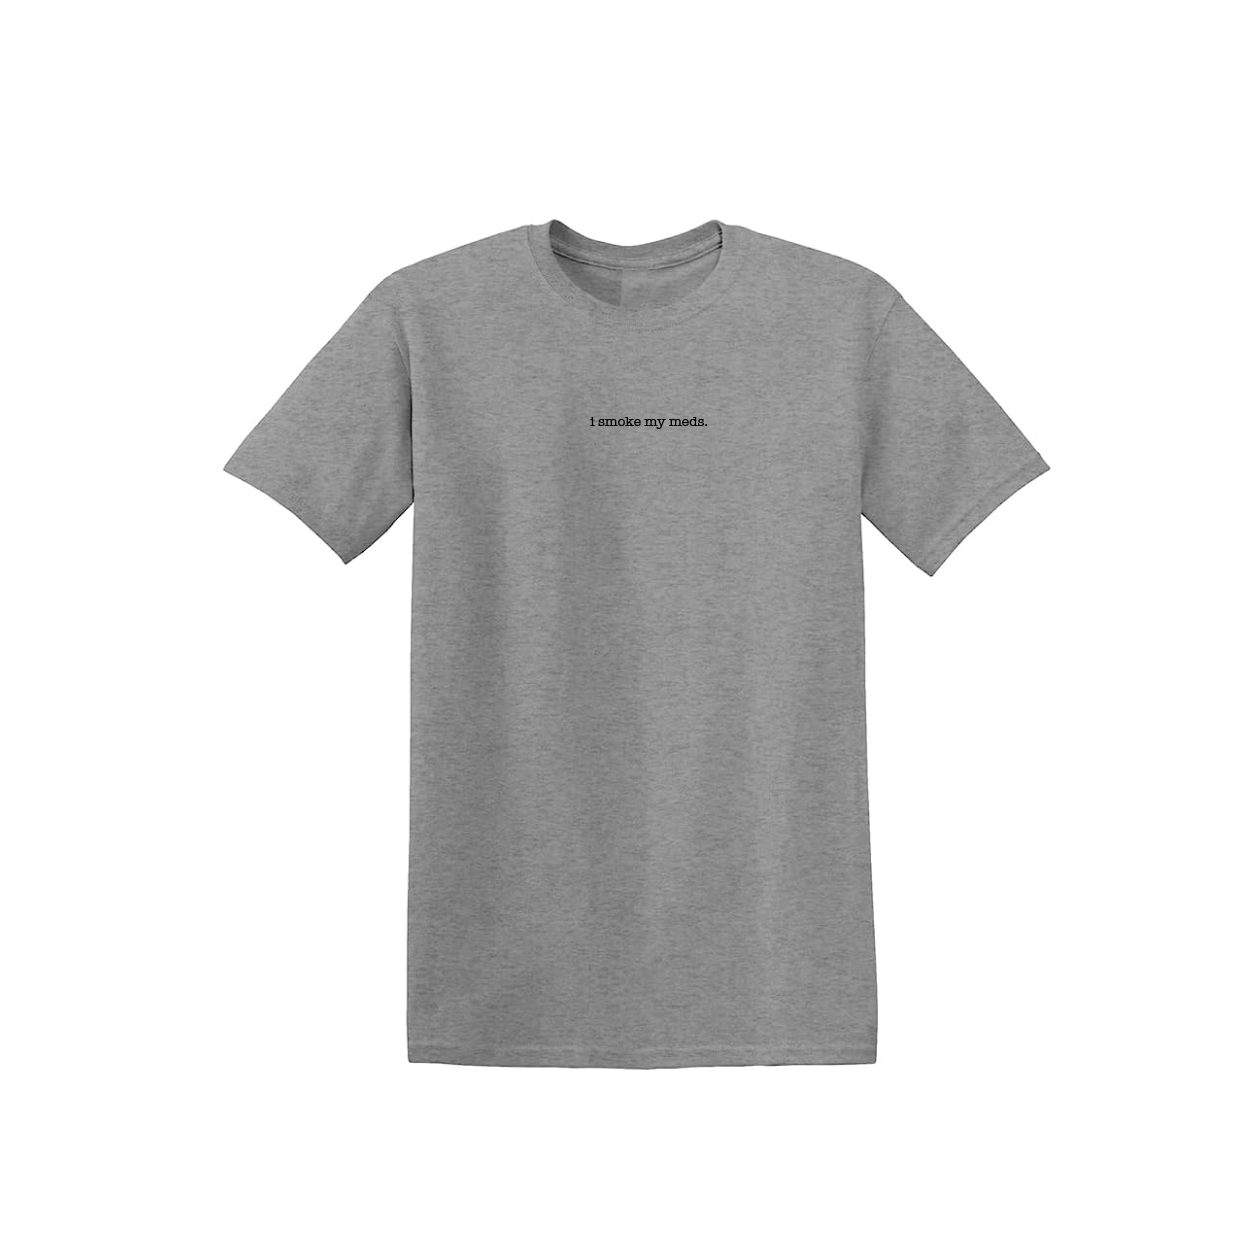 ISMM Classic Tee in Grey